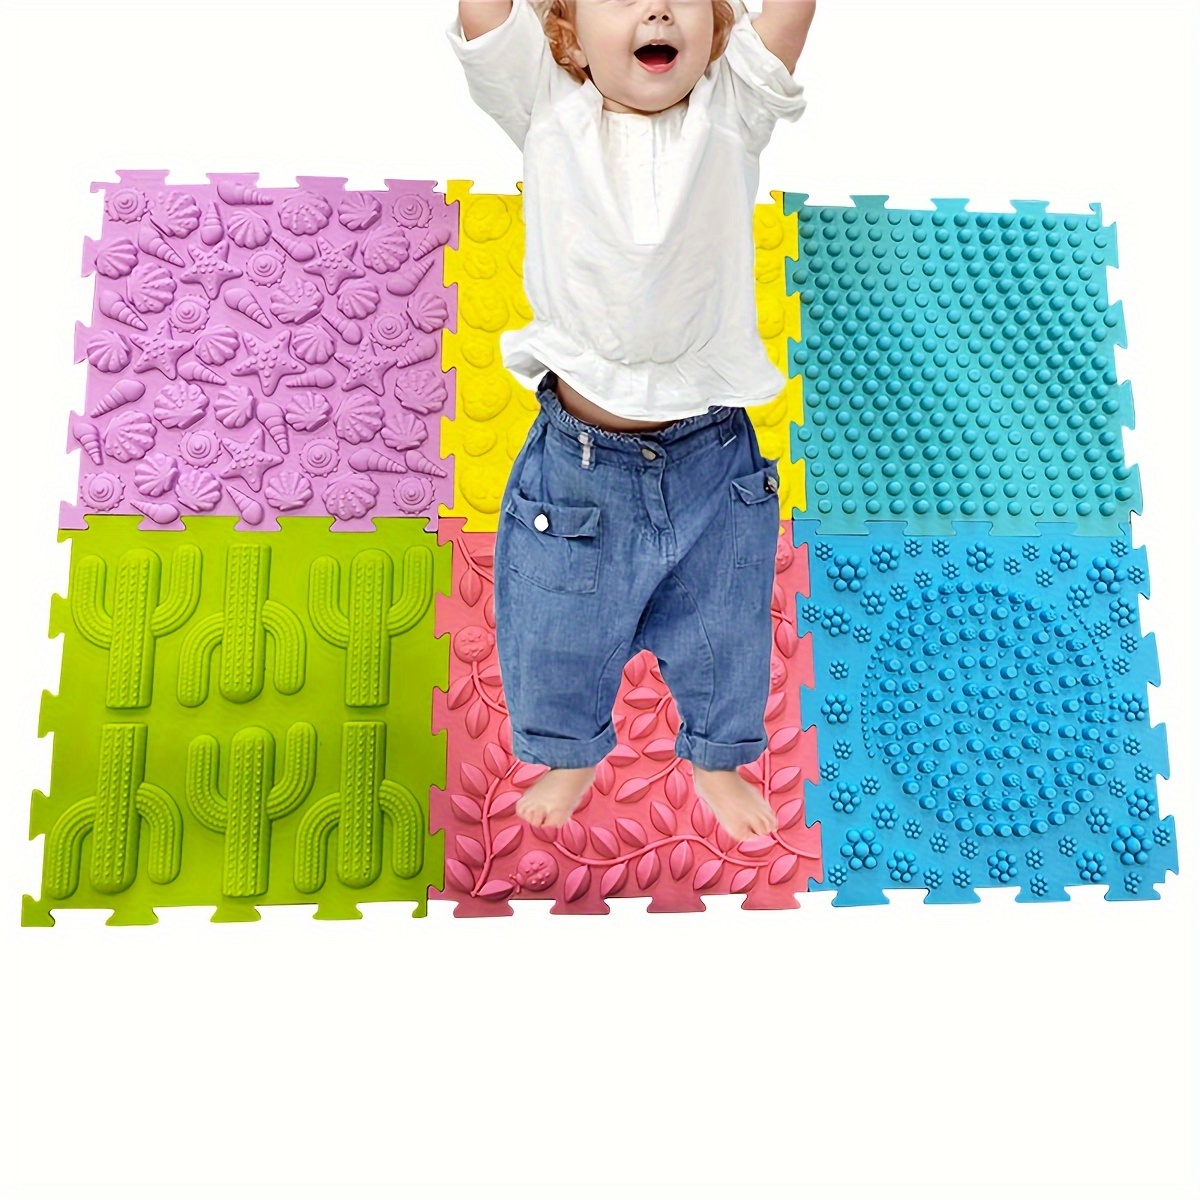 

6 In 1 Set Interlocking Floor Mats, Foam Mats For Floor With Edgings, Soft Anti-slip Puzzle Area Rug Playmat, Play Mat, Square Tiles For Room Decor